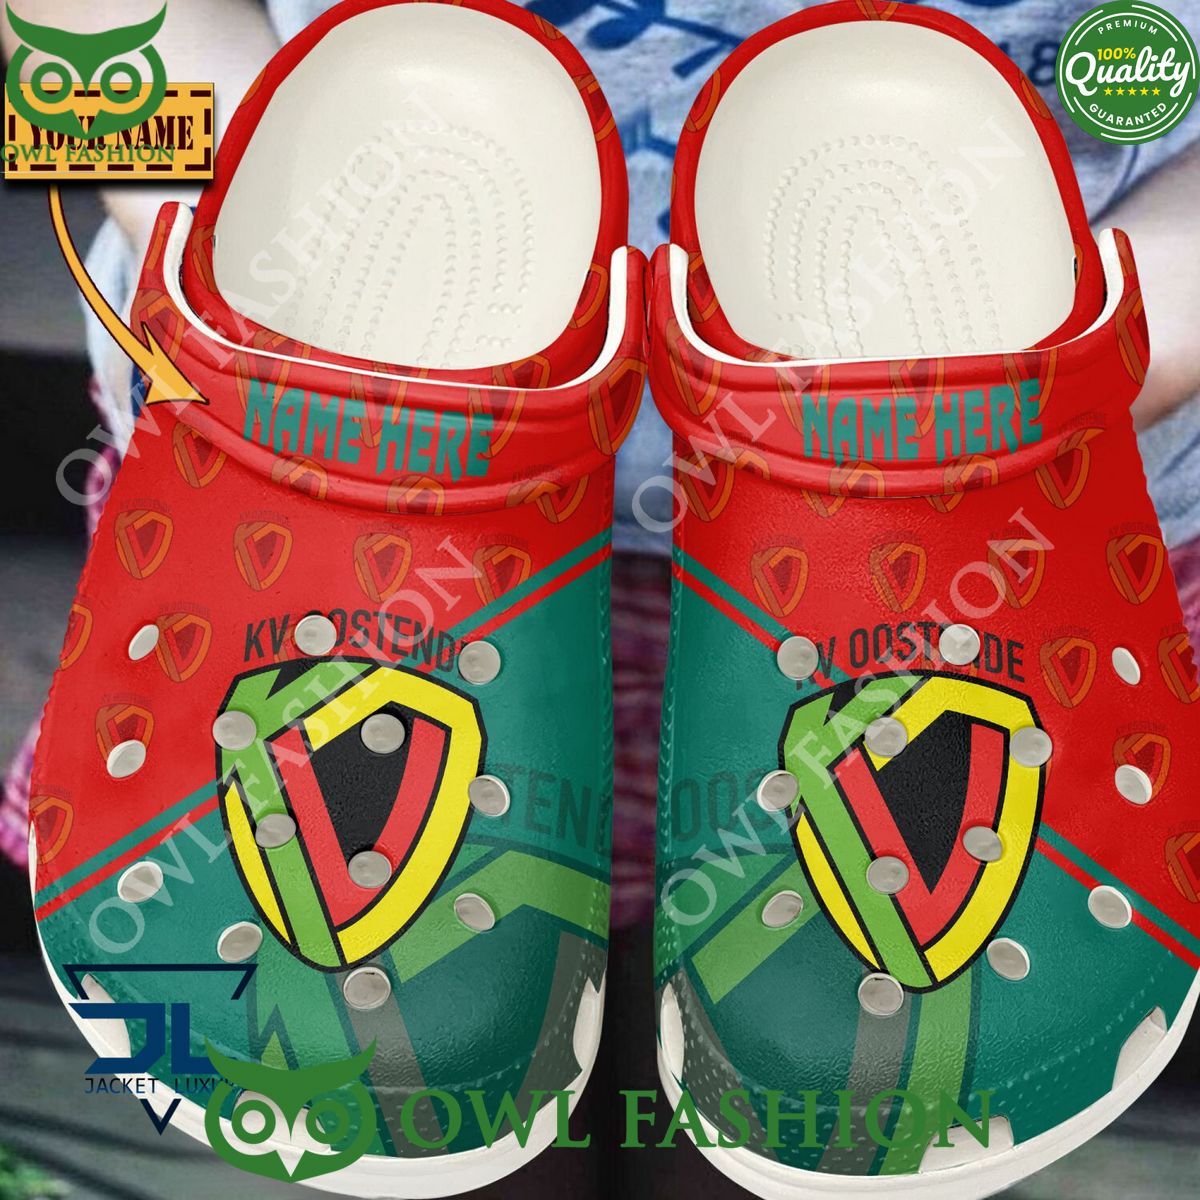 Pro League KV Oostende Football Team Personalized Crocs